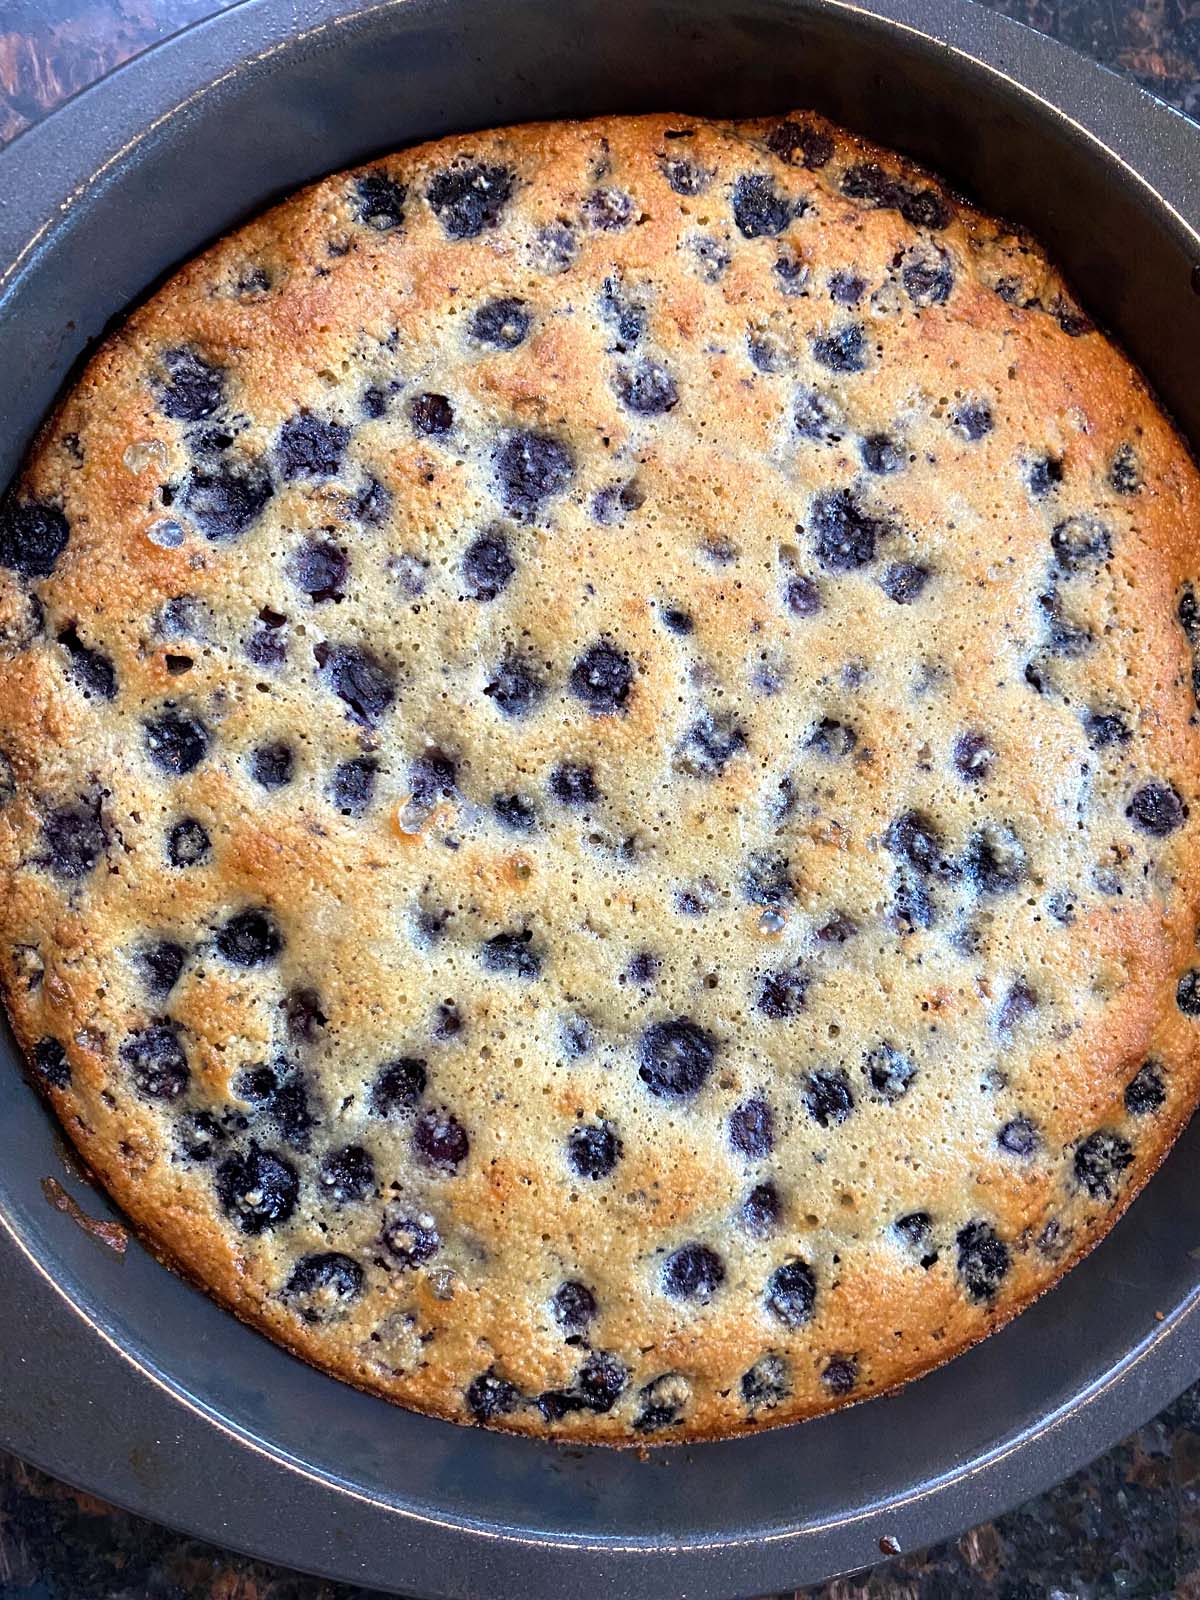 Baked gluten free blueberry cake in the pan.